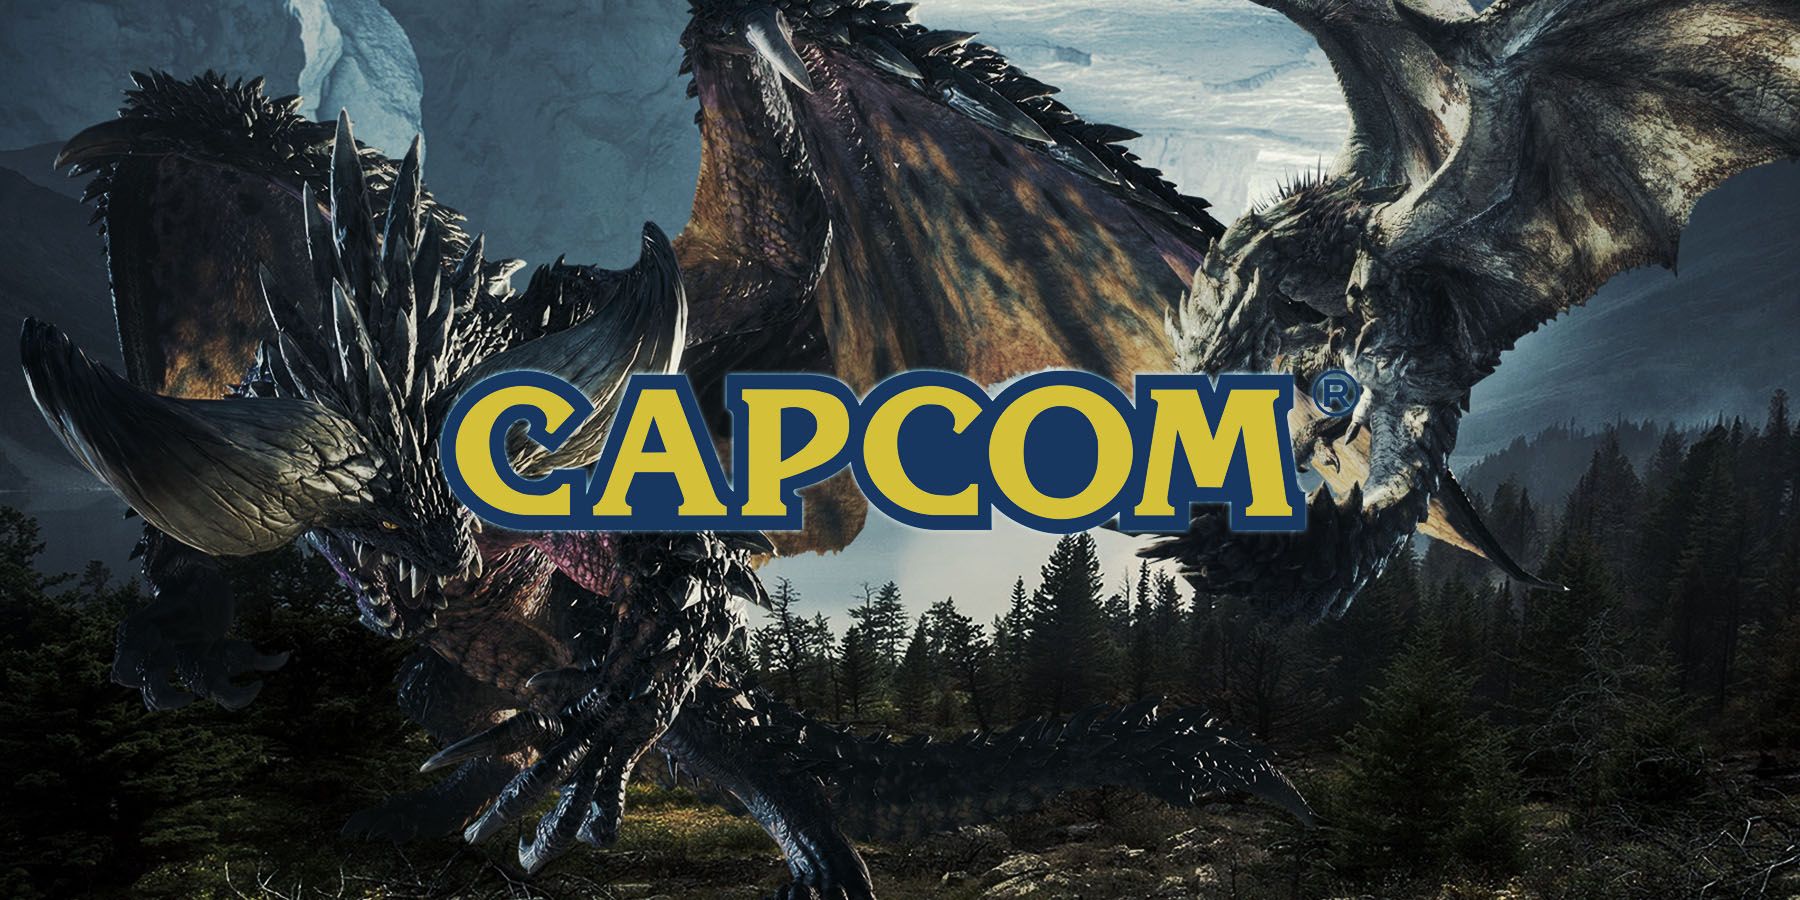 New Monster Hunter Game Spin-Off Could Be on the Way